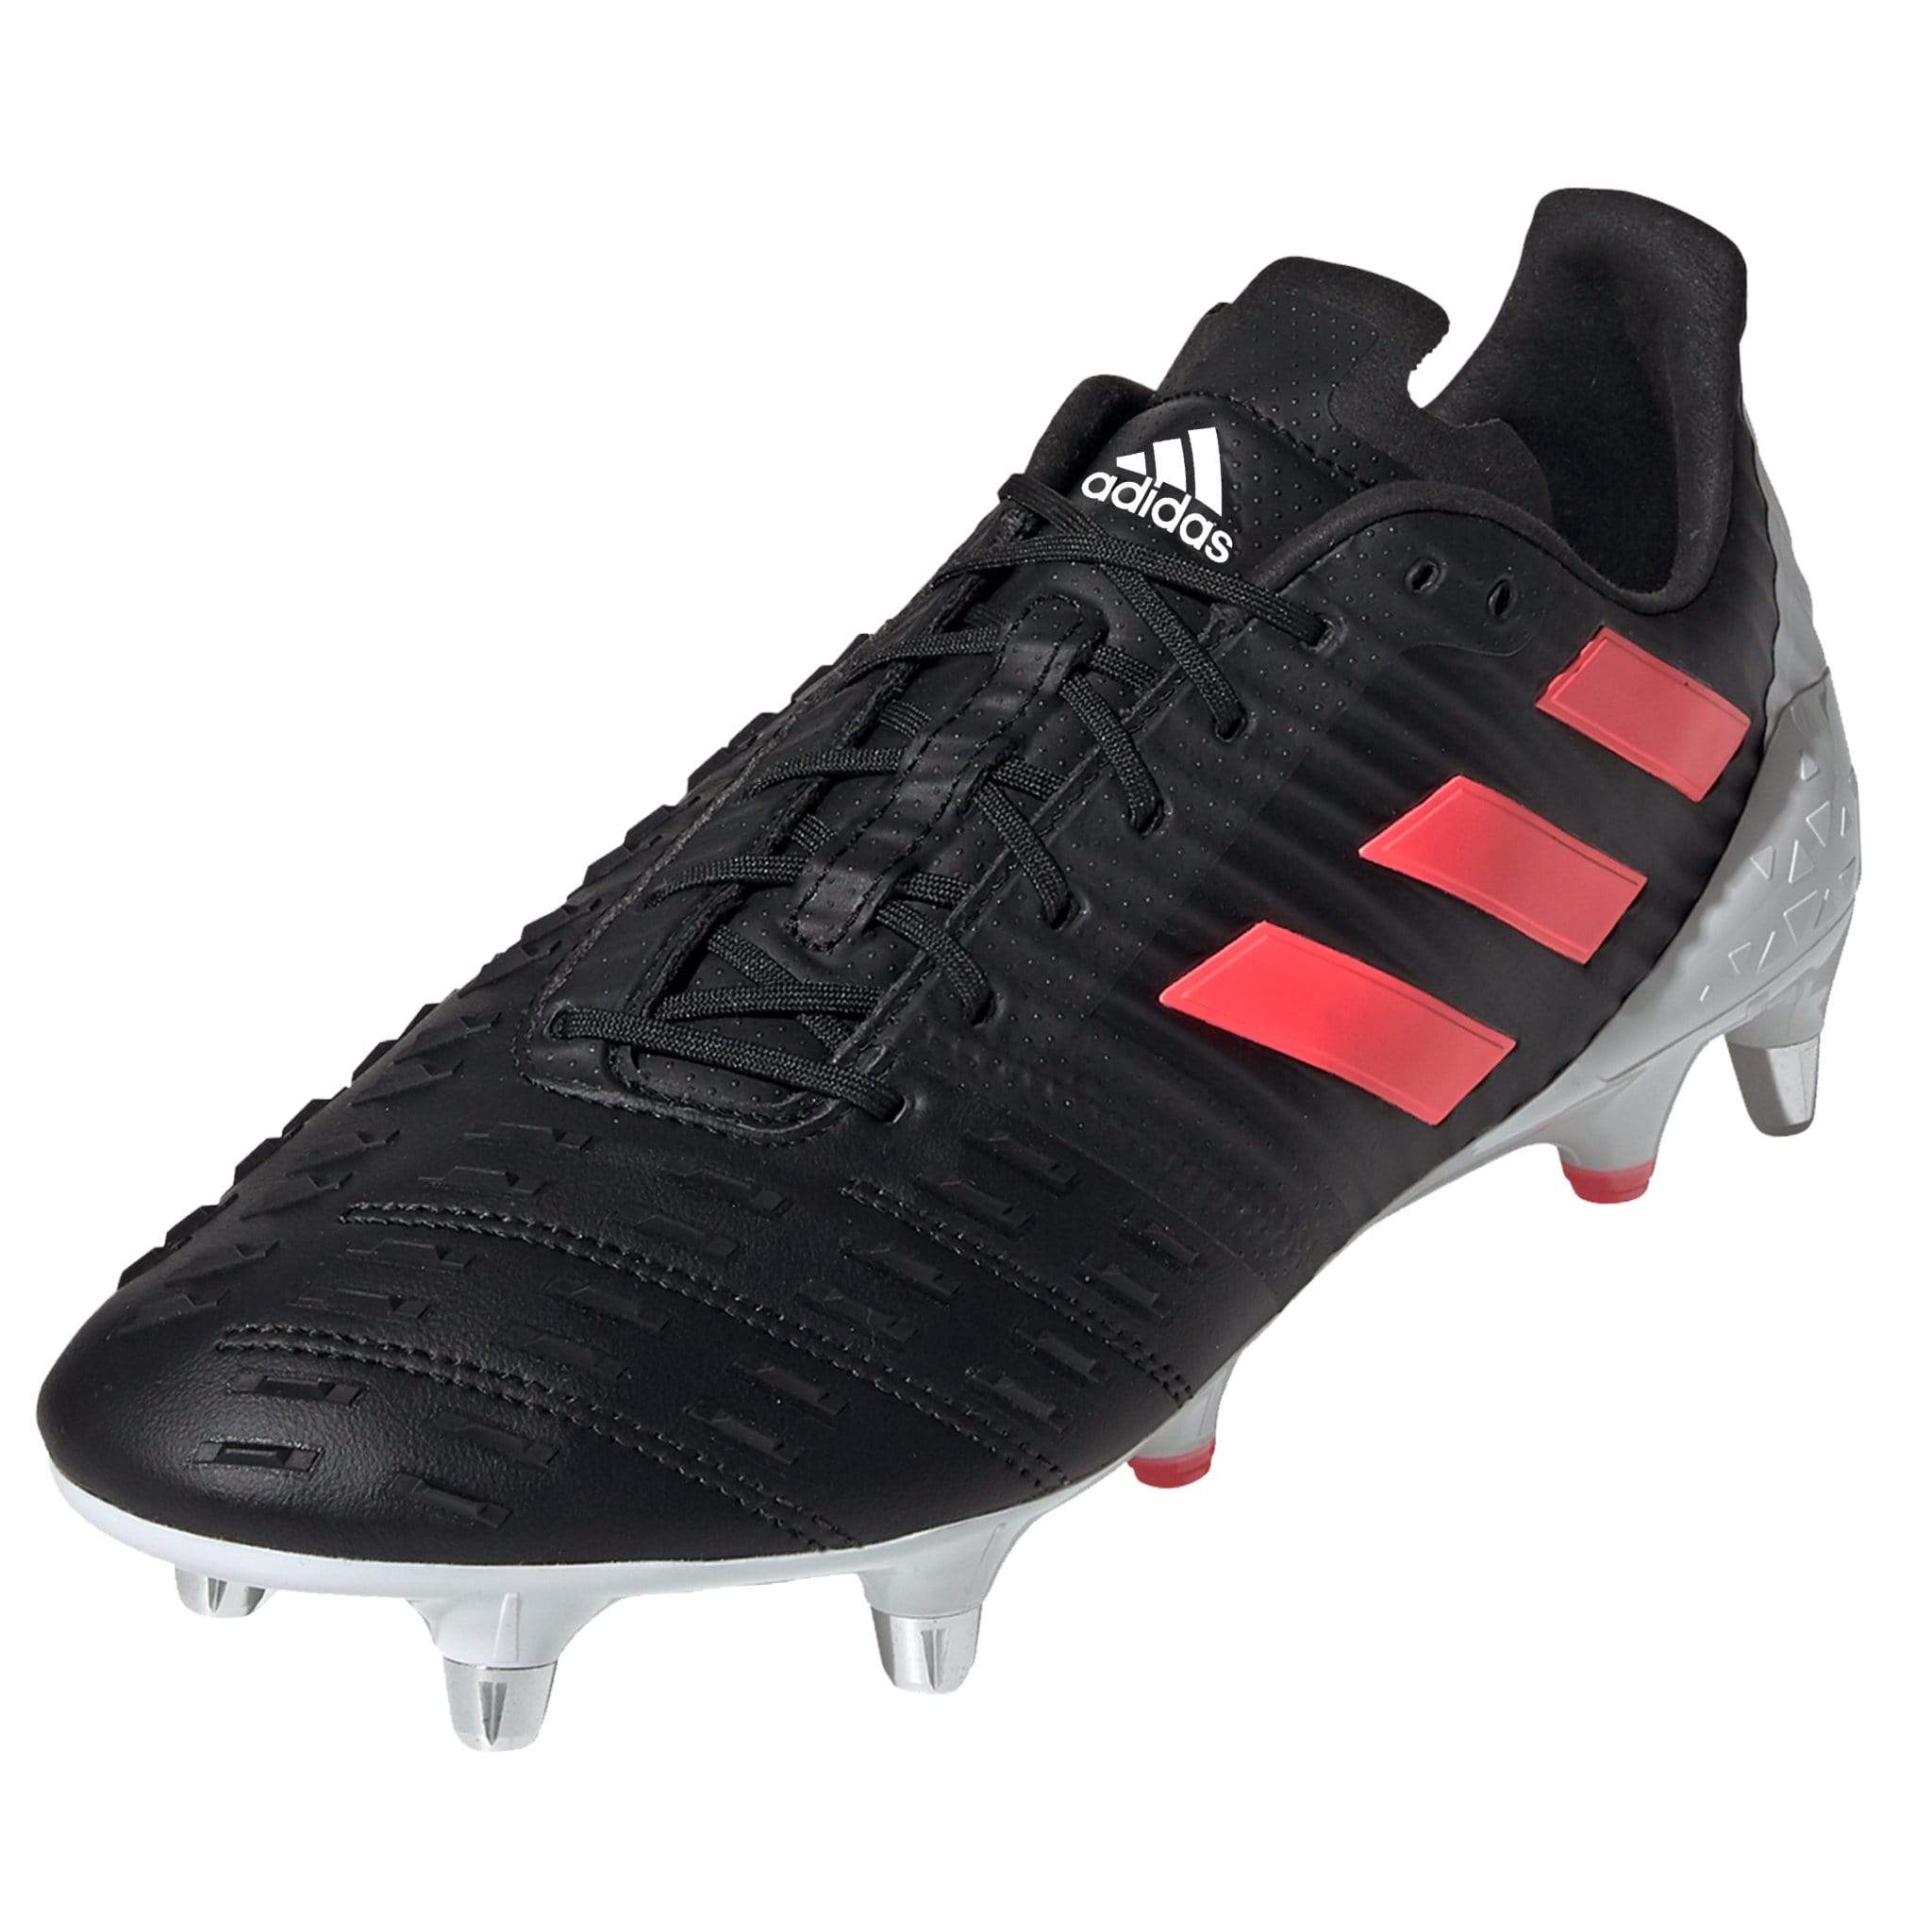 Adidas Malice Control Rugby Cleat - Soft Ground Boot - Core Black/Signal Pink/Crystal White - SKU FY6970 - World Rugby Shop